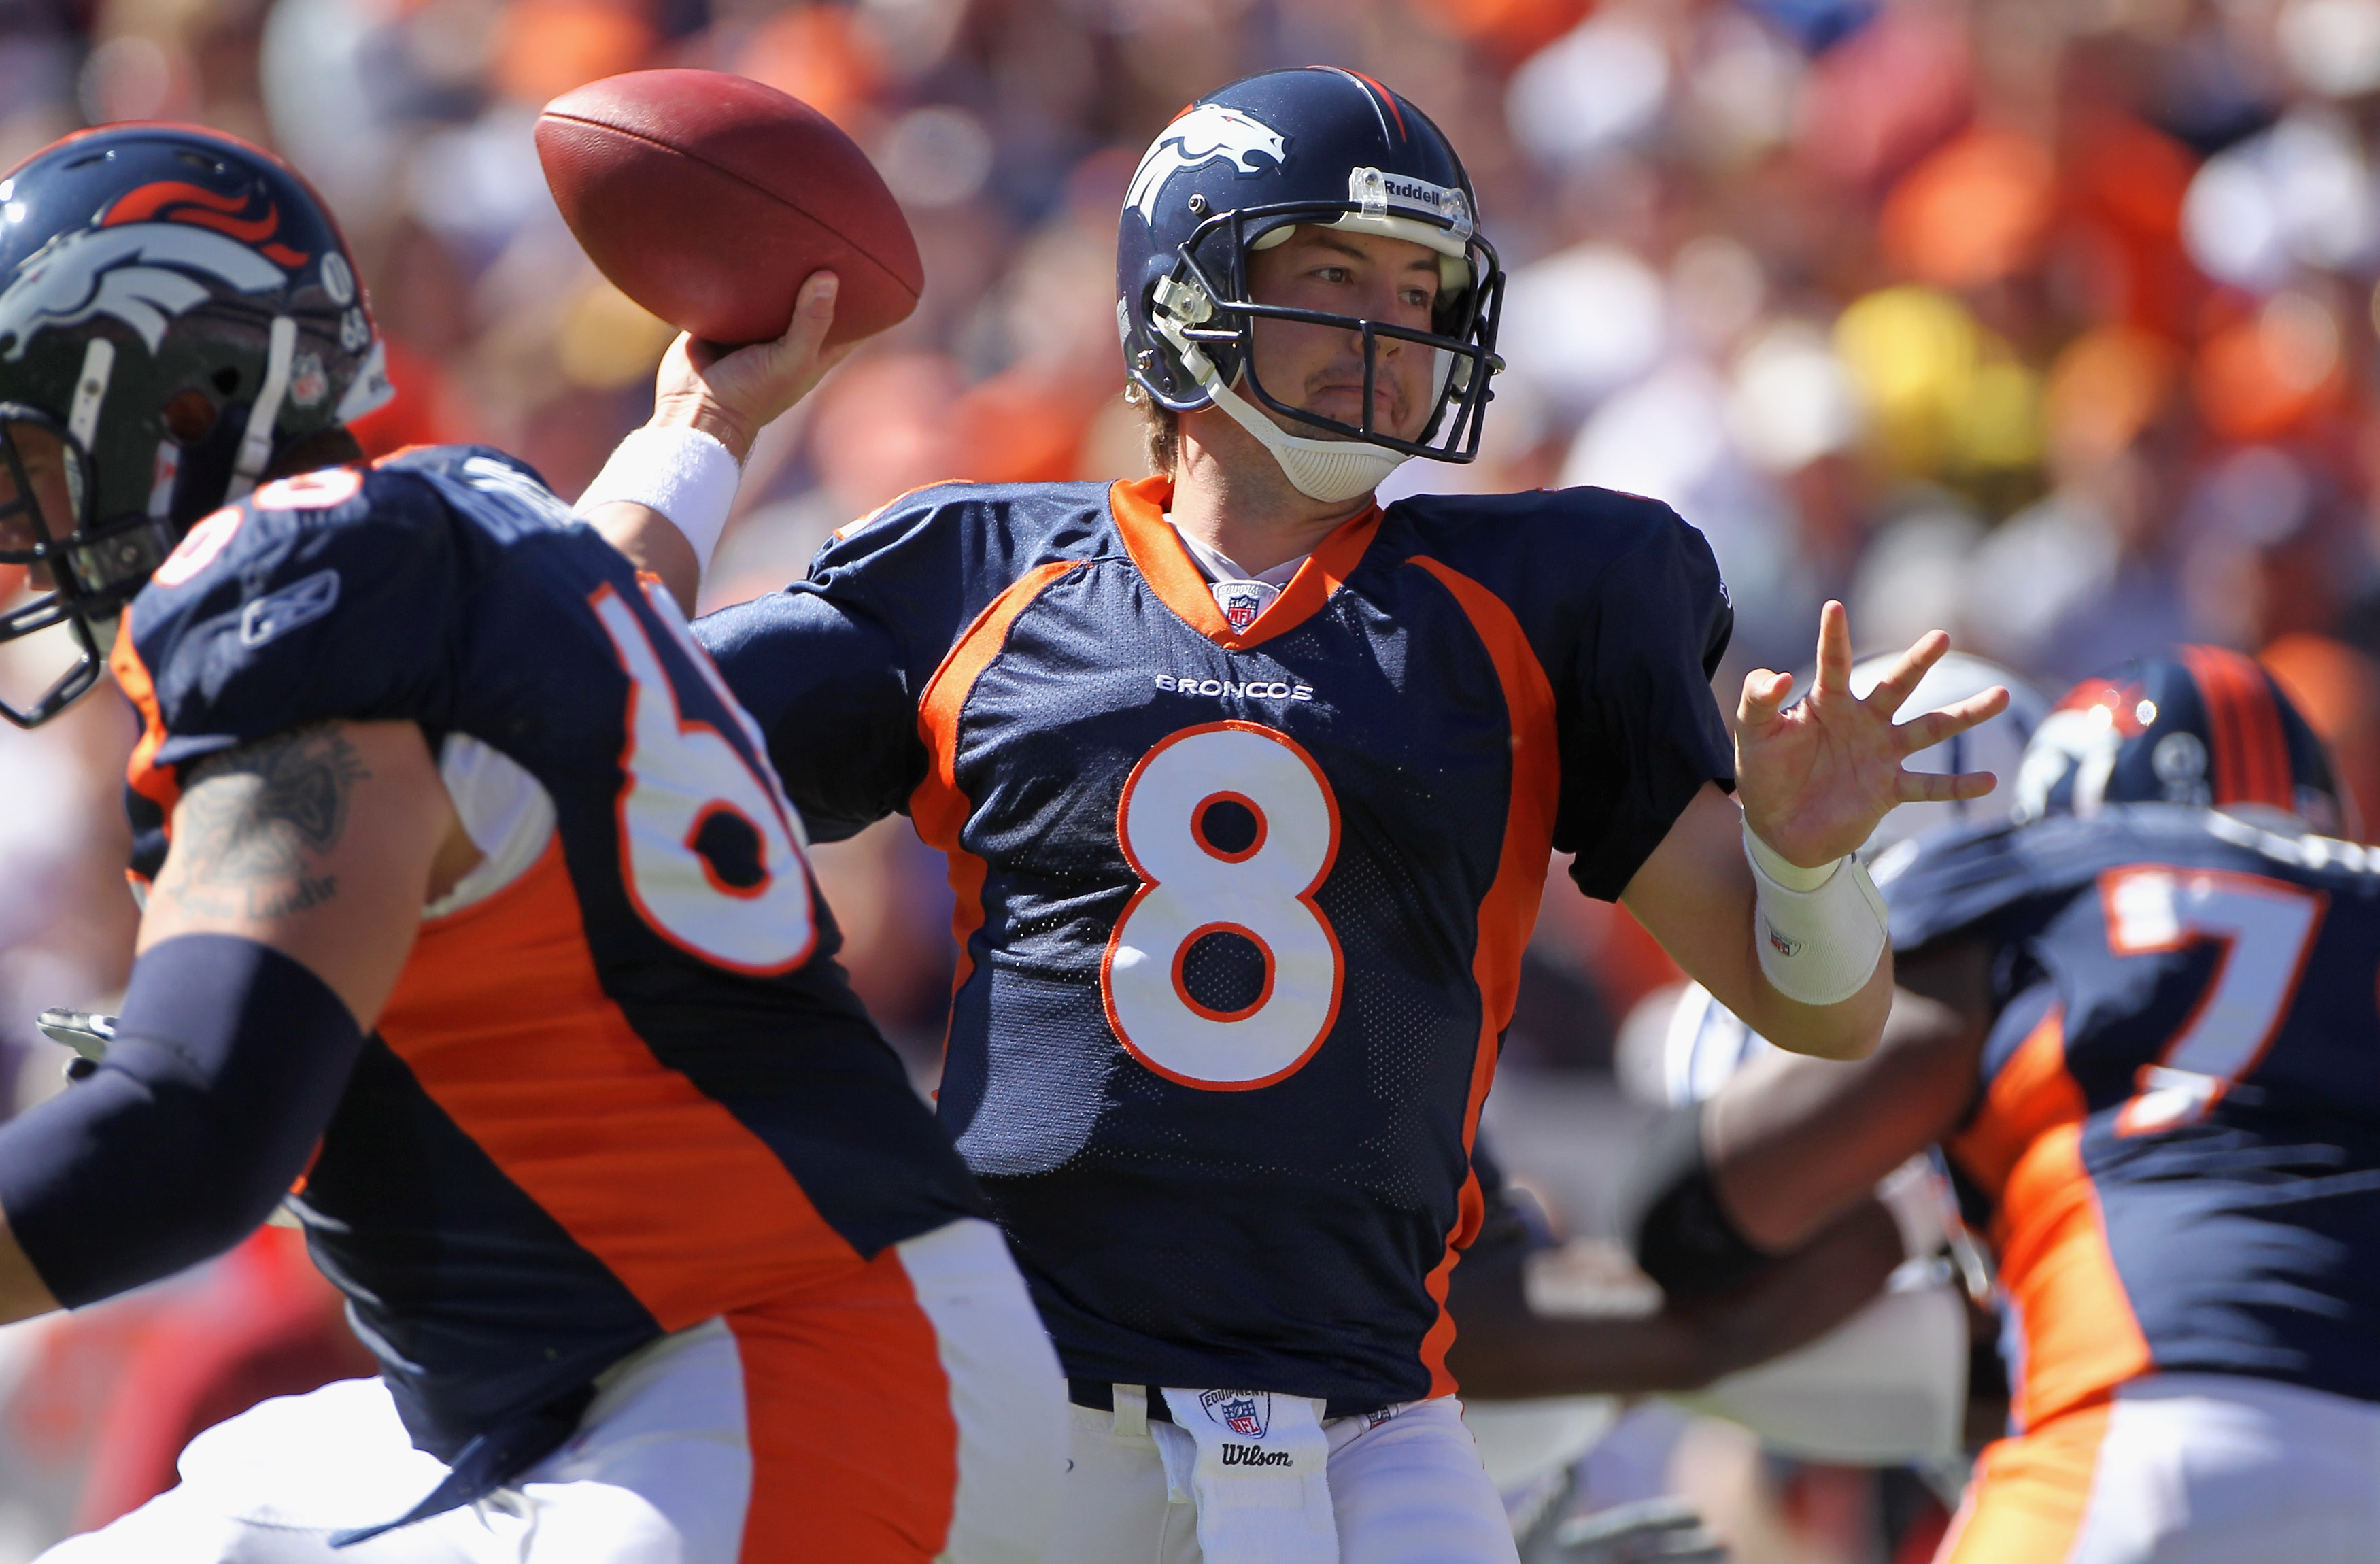 Kyle Orton has turned into a gunslinger with the Broncos